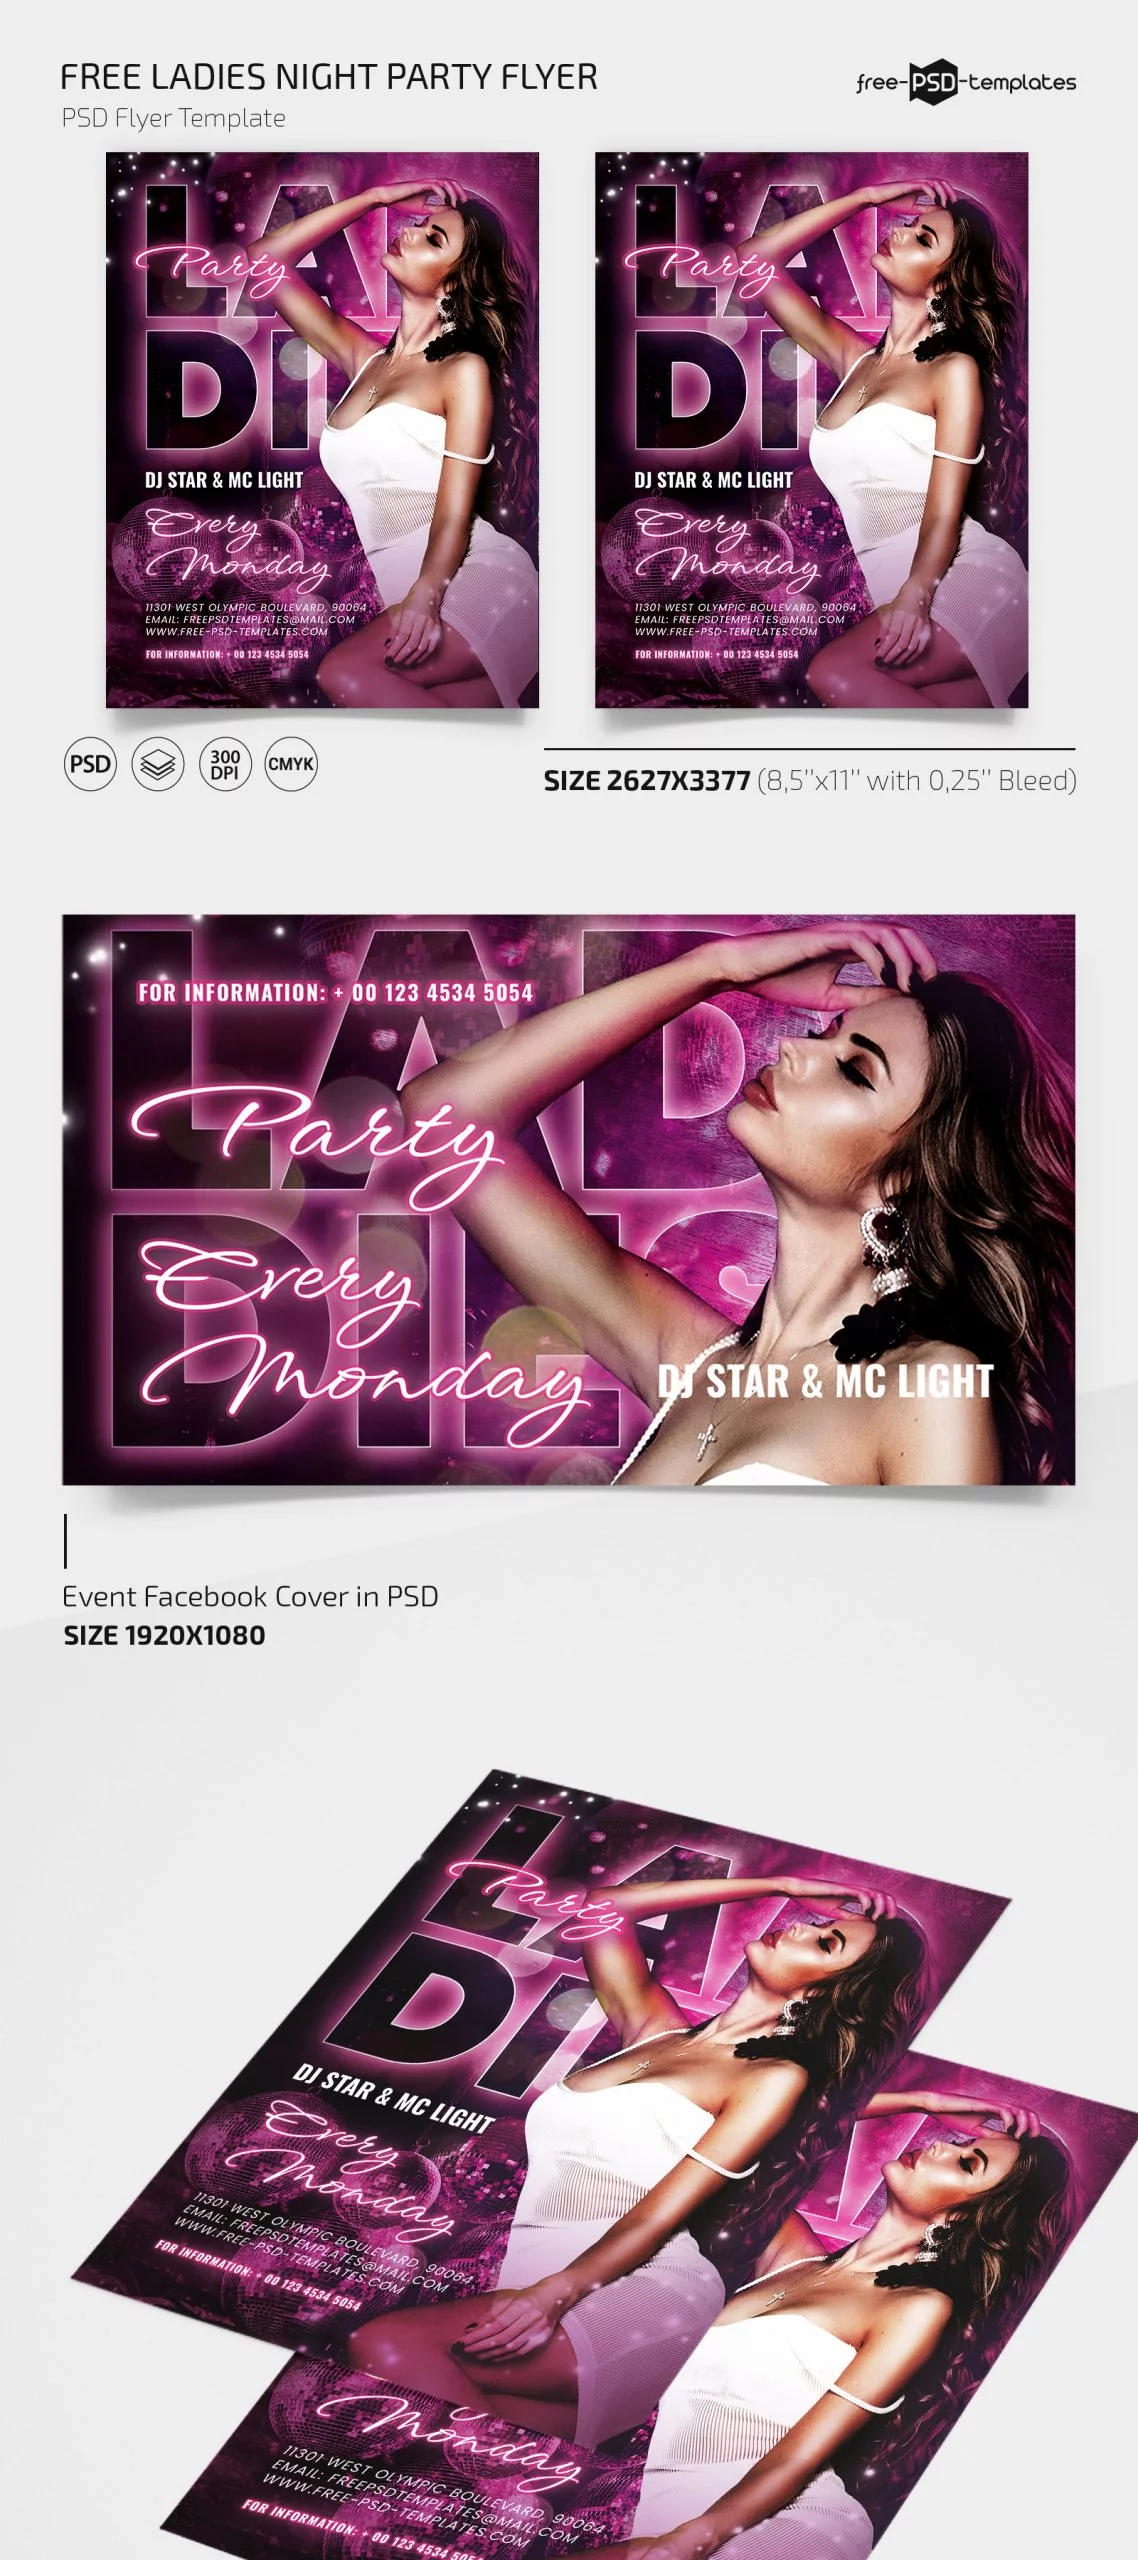 Free Ladies Night Flyer Template in PSD